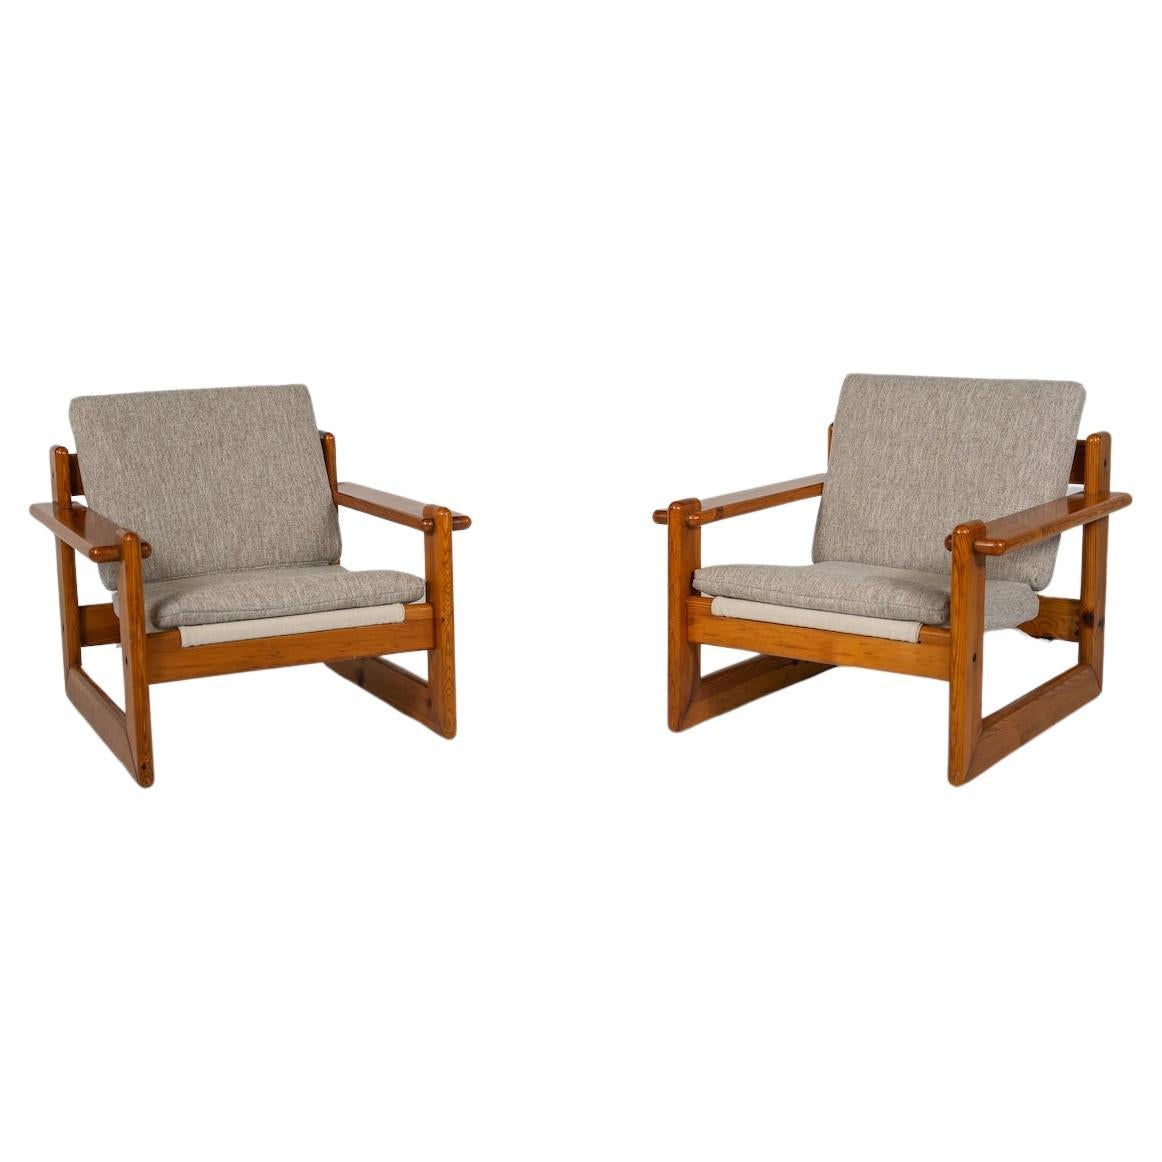 Mid-Century Modern Pair of Lounge Chairs, Wood and Fabric, Italy, 1970s For Sale